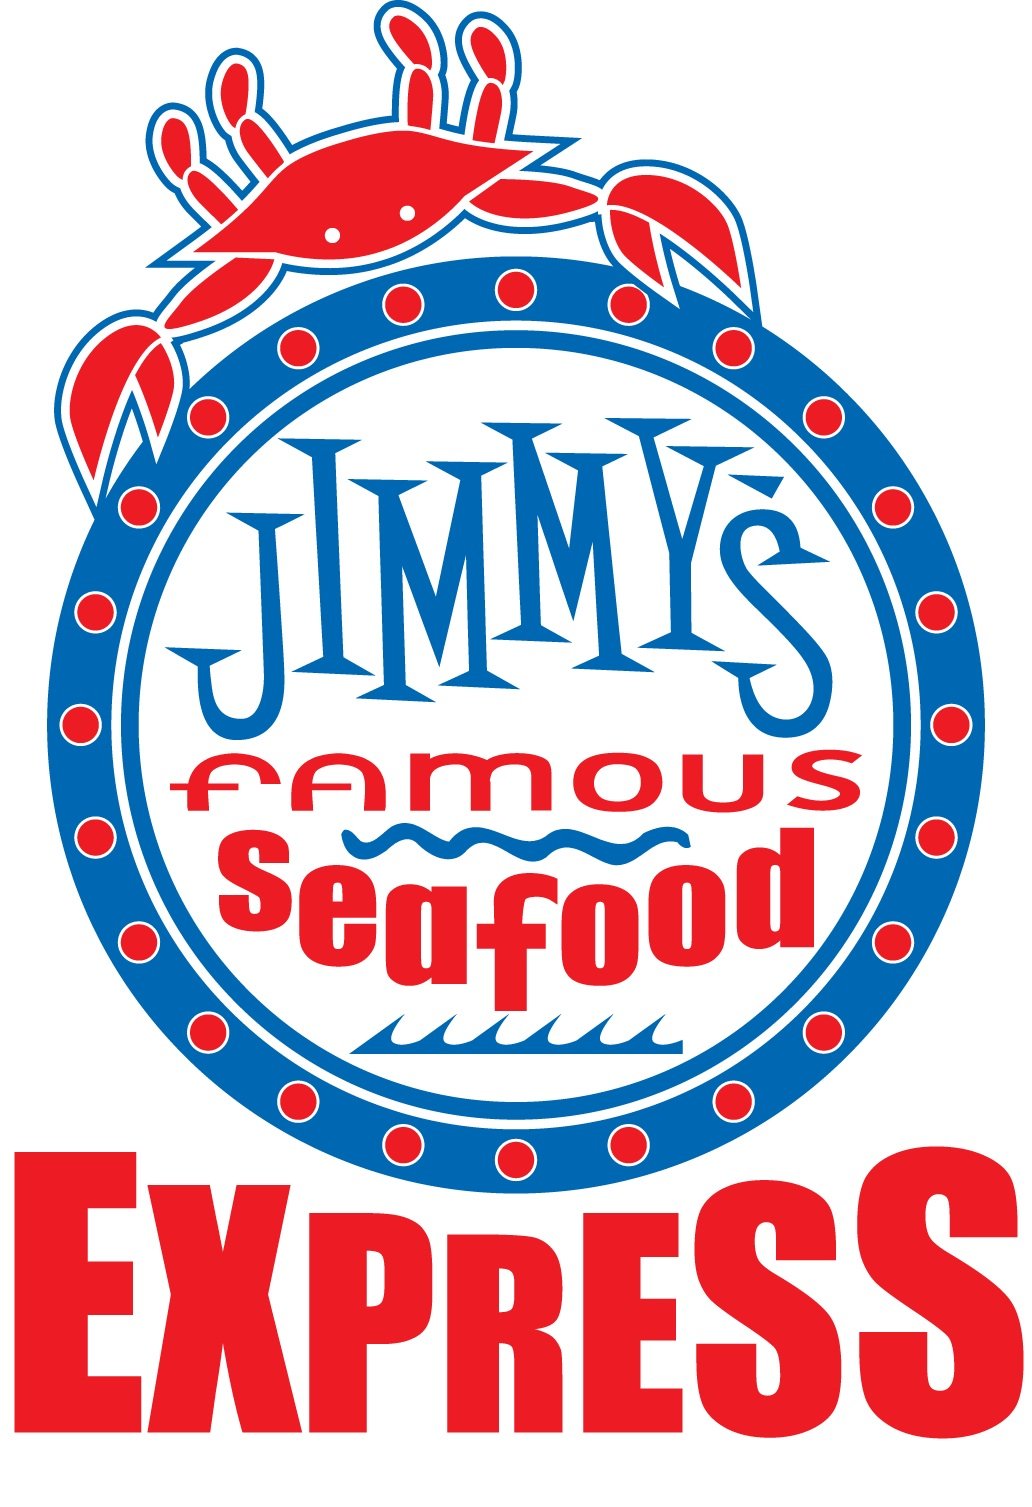 Jimmy's Famous Seafood Express in Tampa Florida